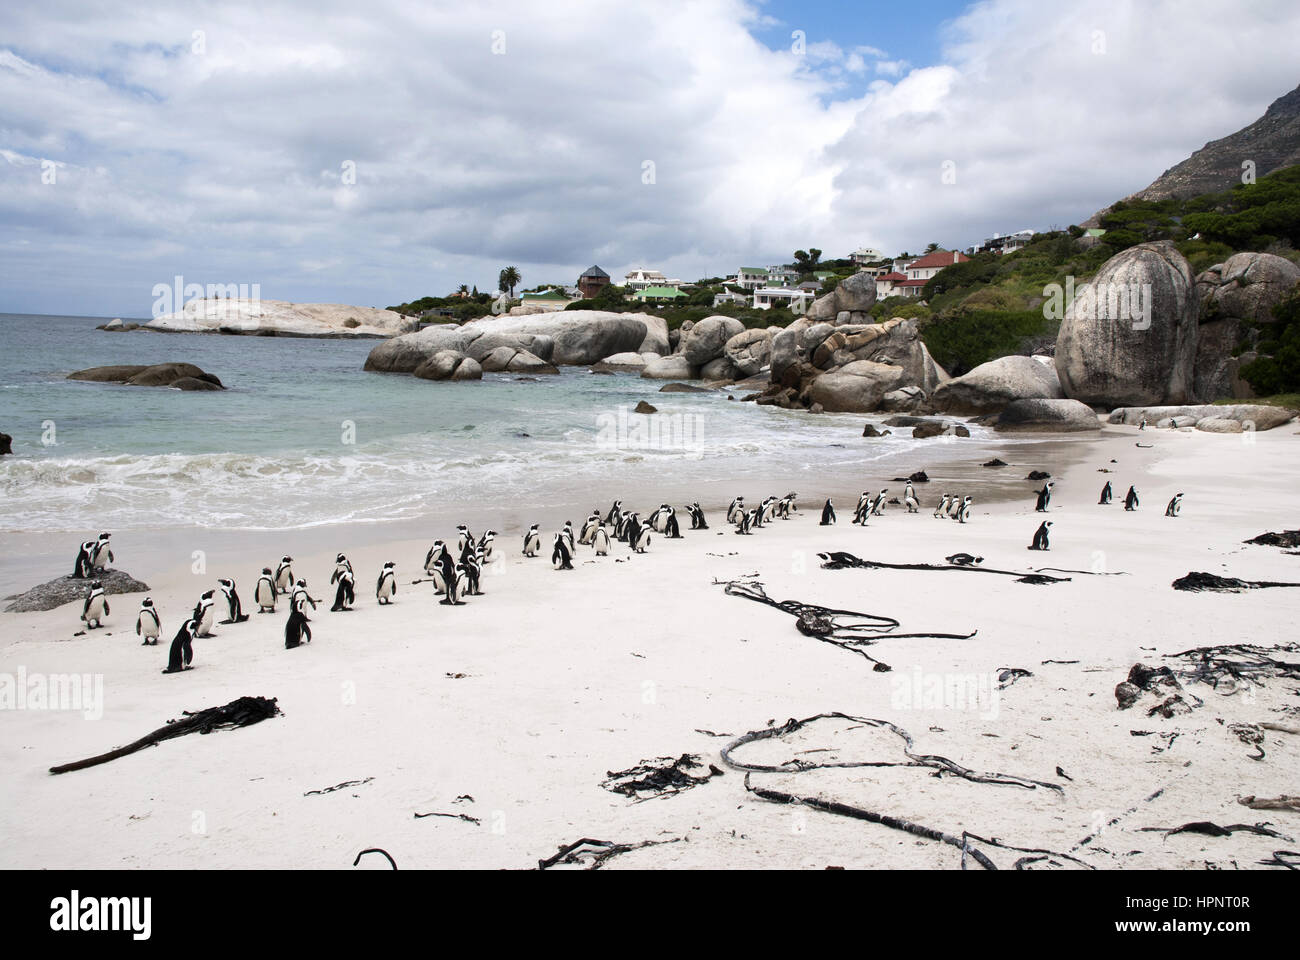 A colony of African penguins on Boulders Beach, South Africa Stock Photo